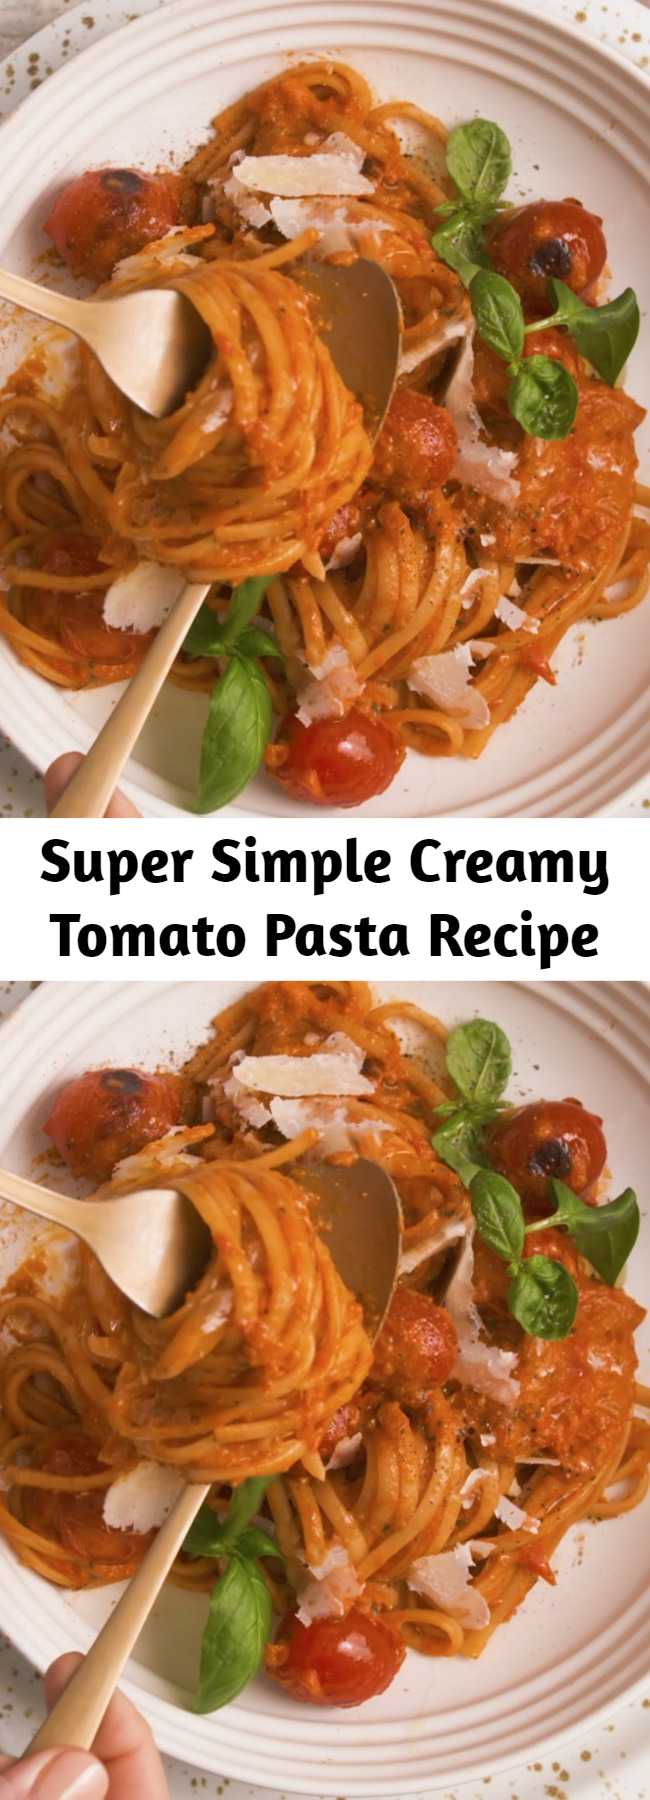 Super Simple Creamy Tomato Pasta Recipe - Roasted tomatoes, red peppers + onions and garlic blended together with some fresh basil leaves and creamy = the most simple yet delicious pasta sauce!